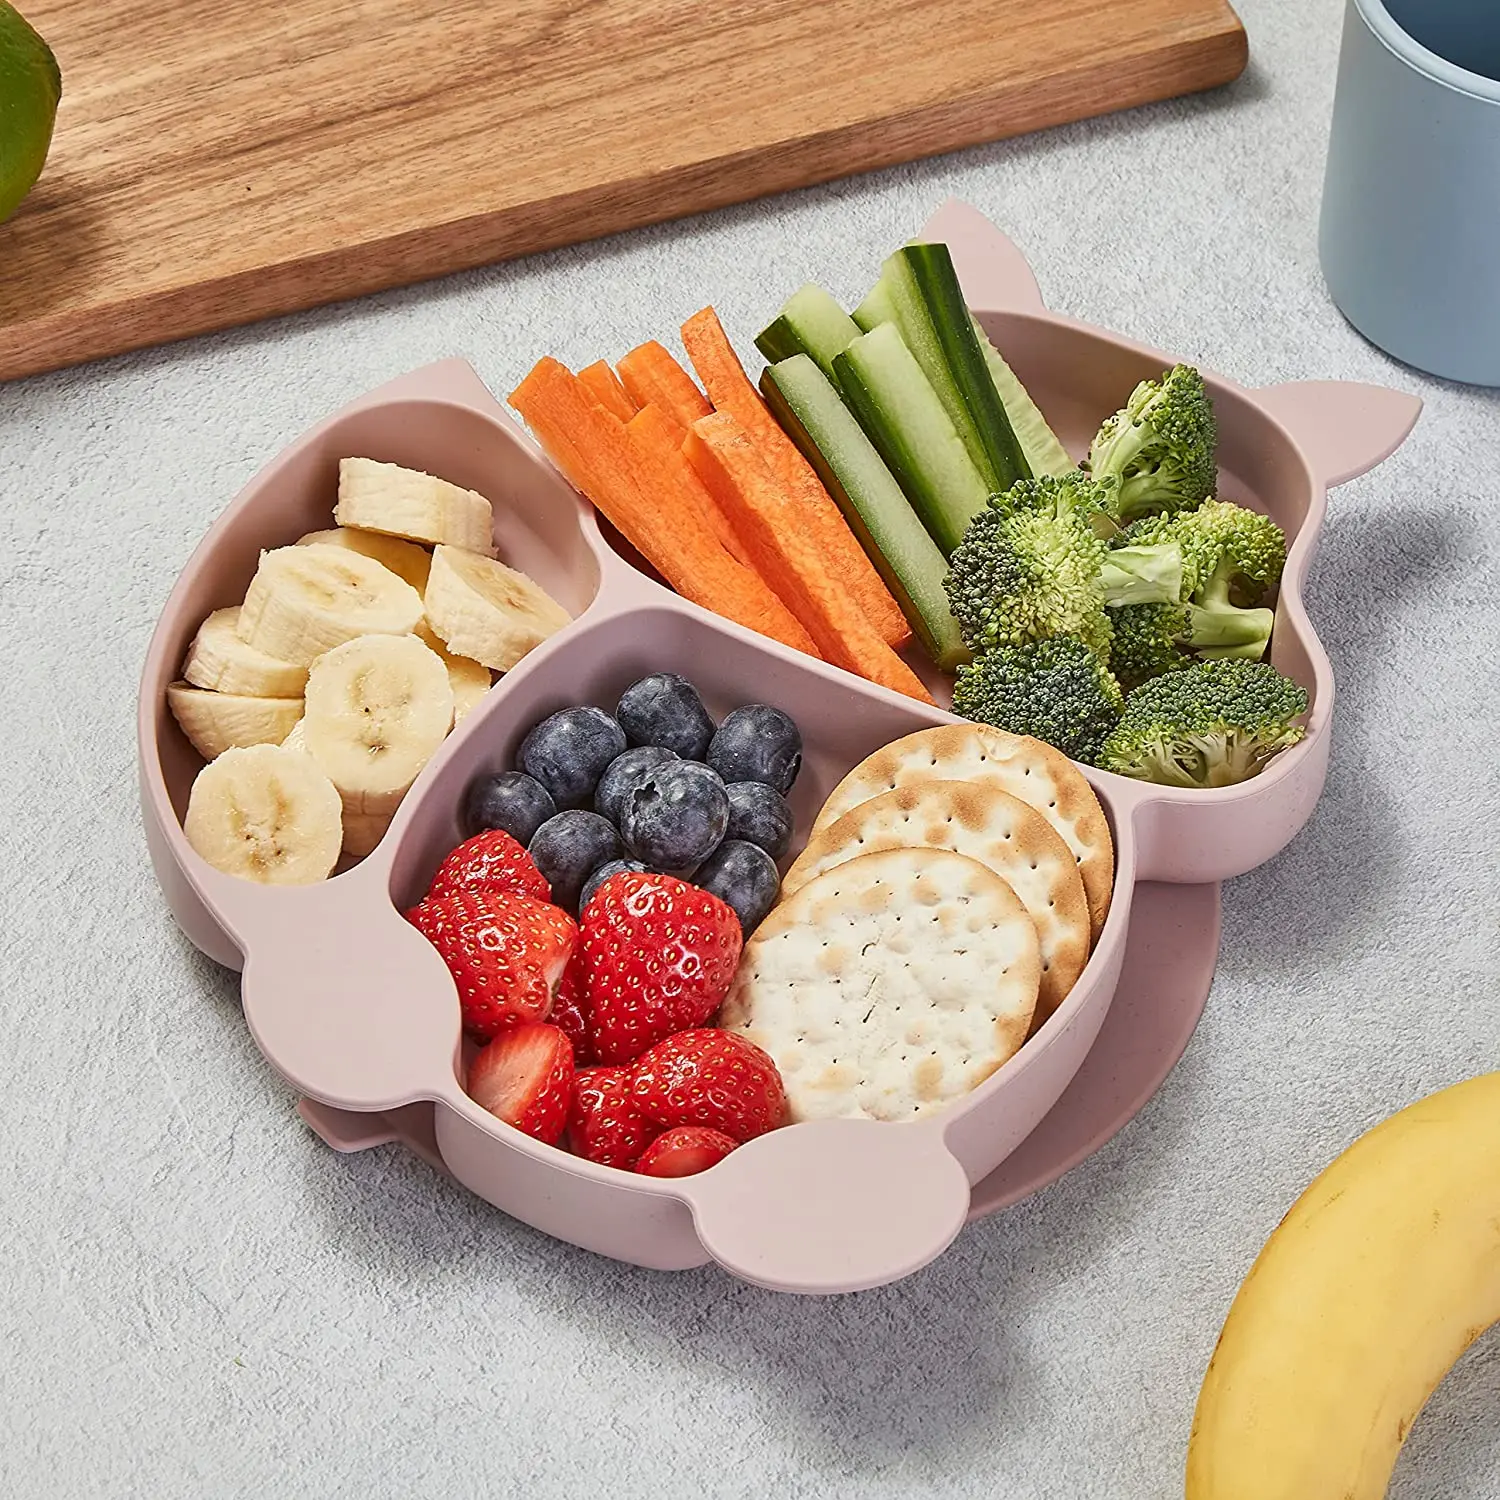 https://ae01.alicdn.com/kf/S4227cc86e3e744e49614c8d77e266b0dD/Baby-Feeding-Set-Silicone-Suction-Bowls-Divided-Plates-Straw-Sippy-Cup-Toddler-Self-Eating-Utensils-Dishes.jpg